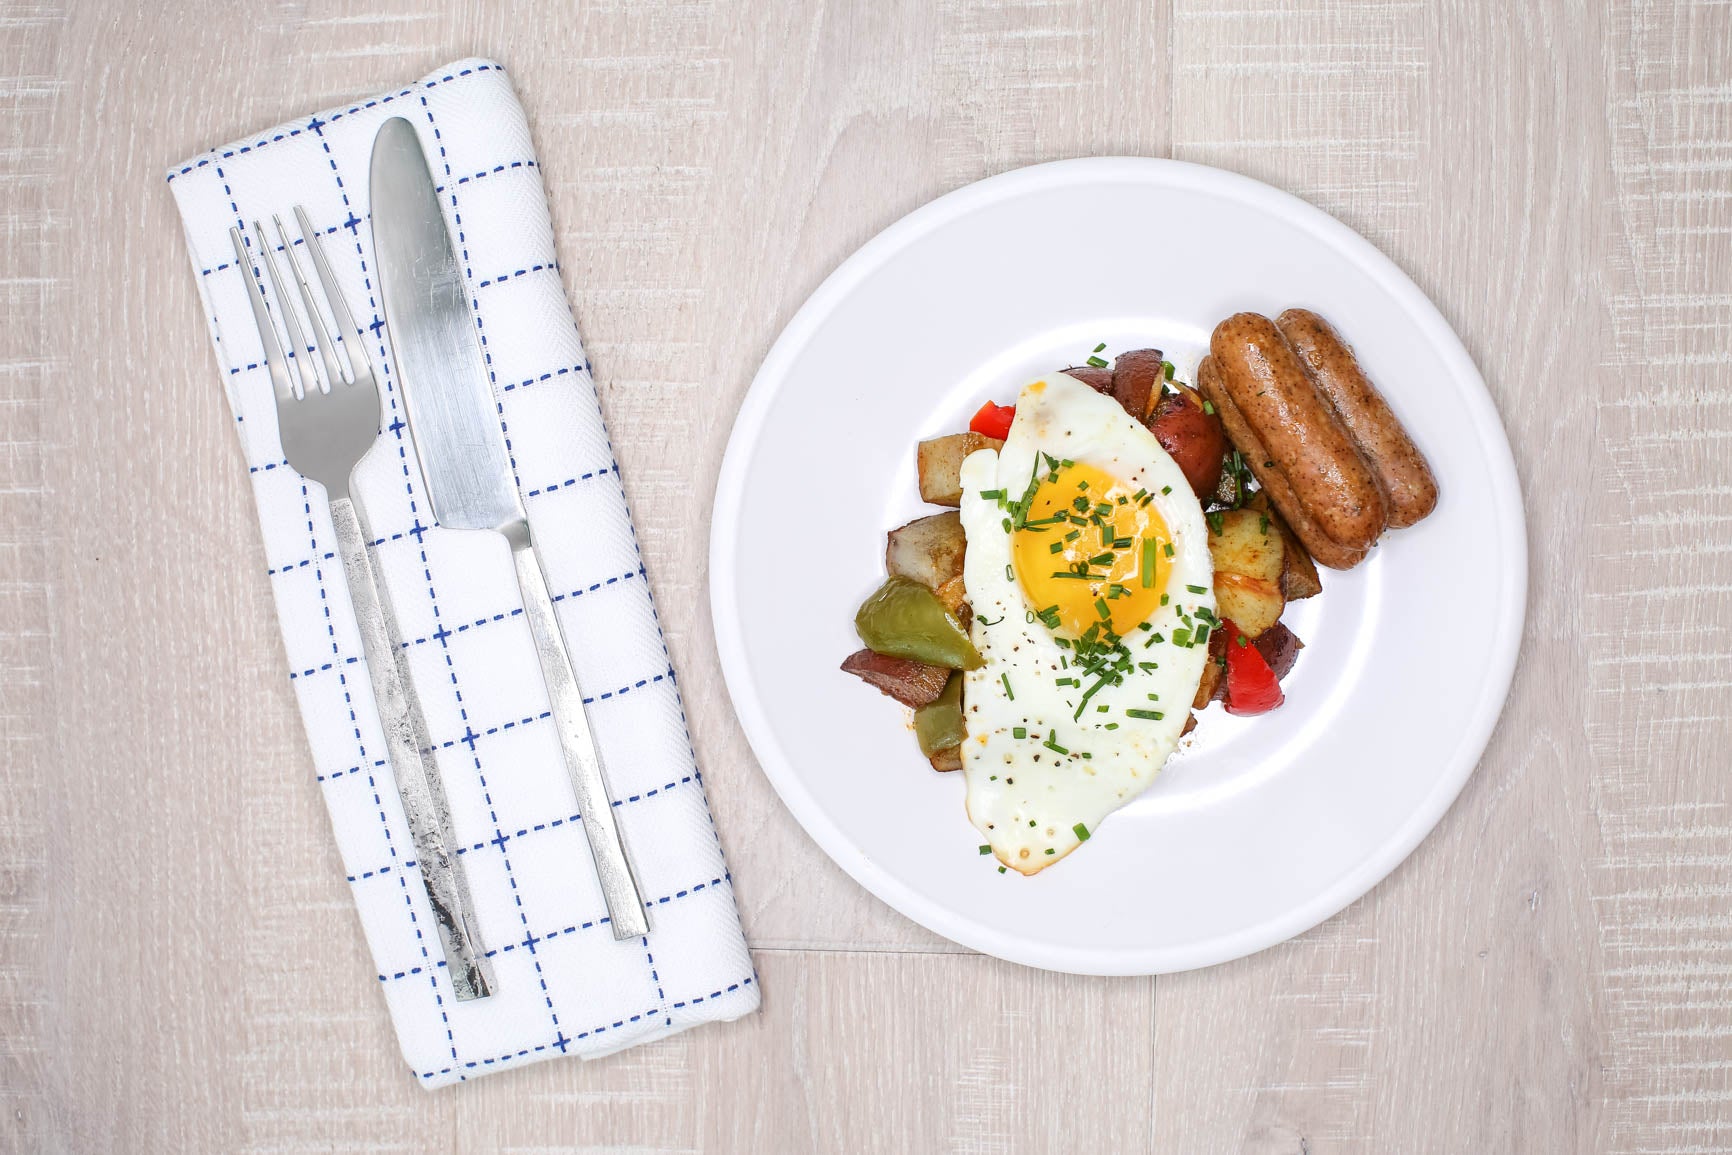 Organic Maple Chicken Sausage with Potato Hash + Fried Egg